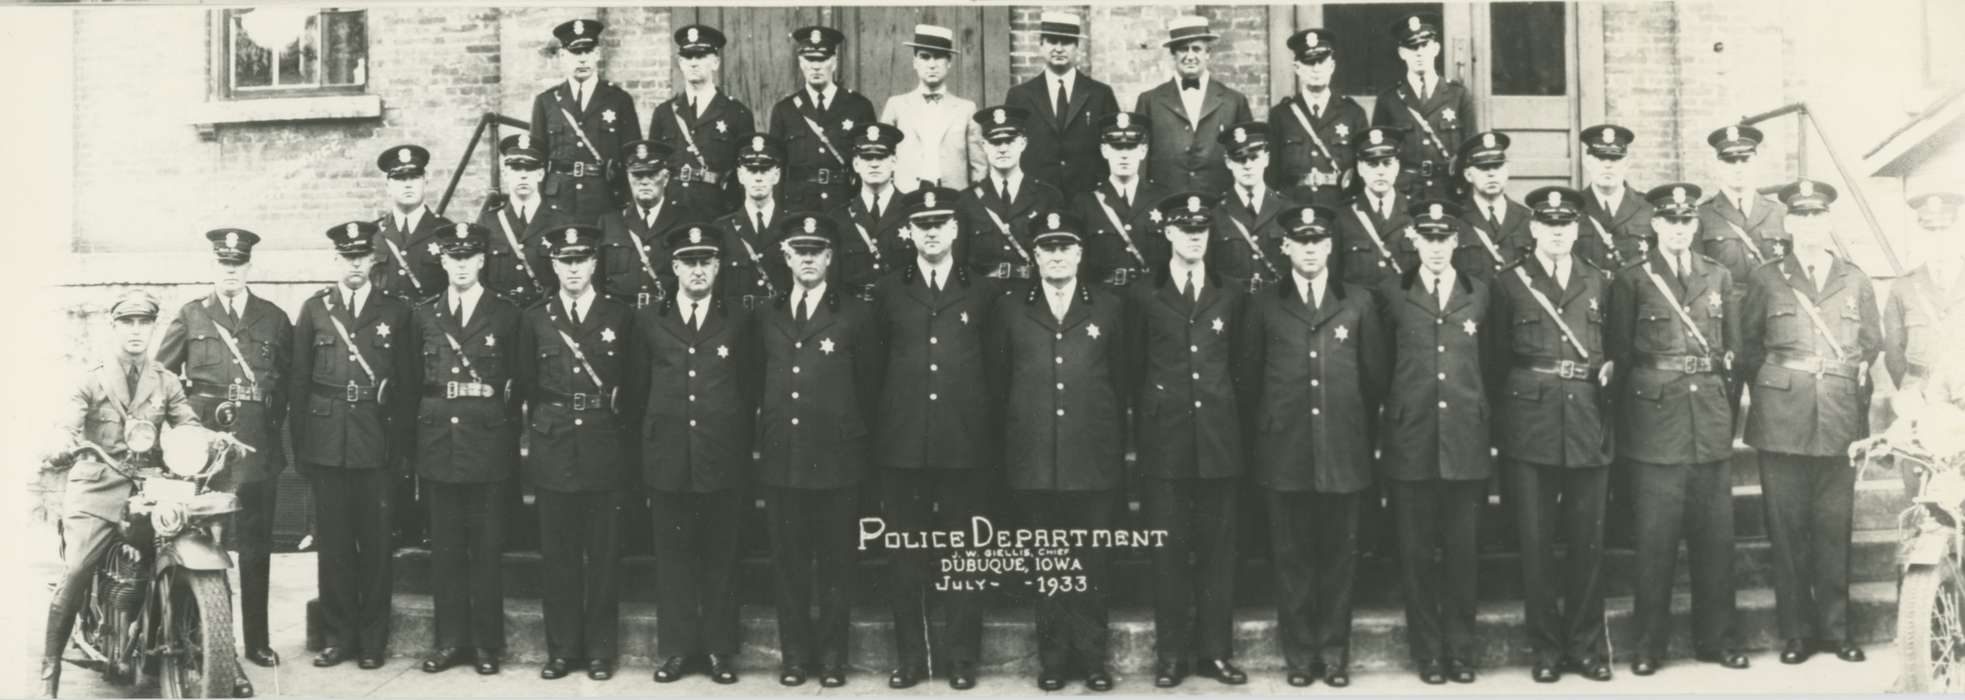 uniform, Cities and Towns, Dubuque, IA, police, Whitfield, Carla & Richard, Iowa History, Portraits - Group, Iowa, history of Iowa, Labor and Occupations, motorcycle